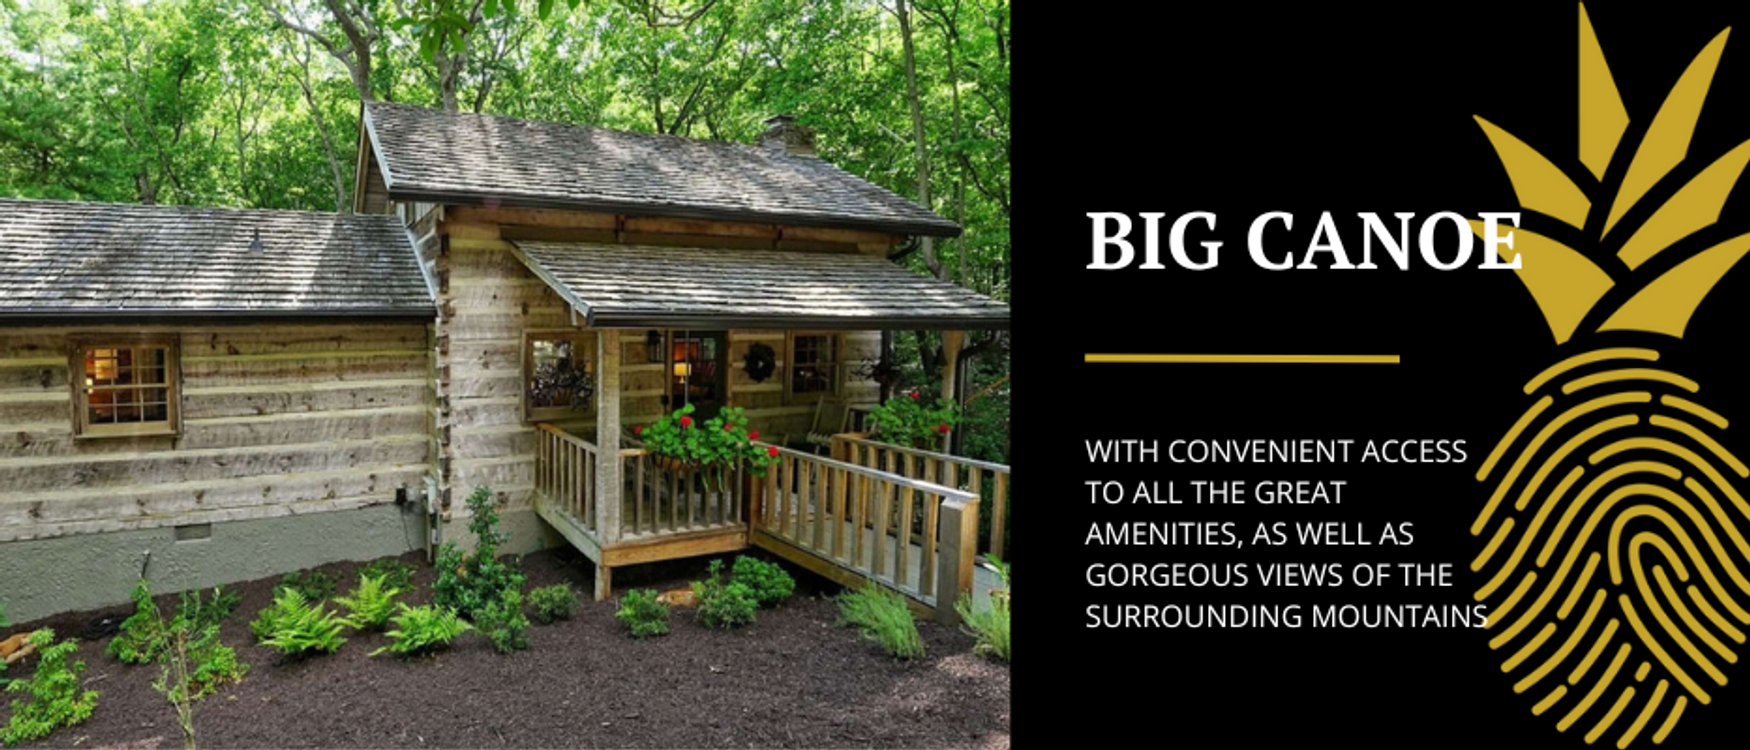 A view of Big Canoe's cabin rentals